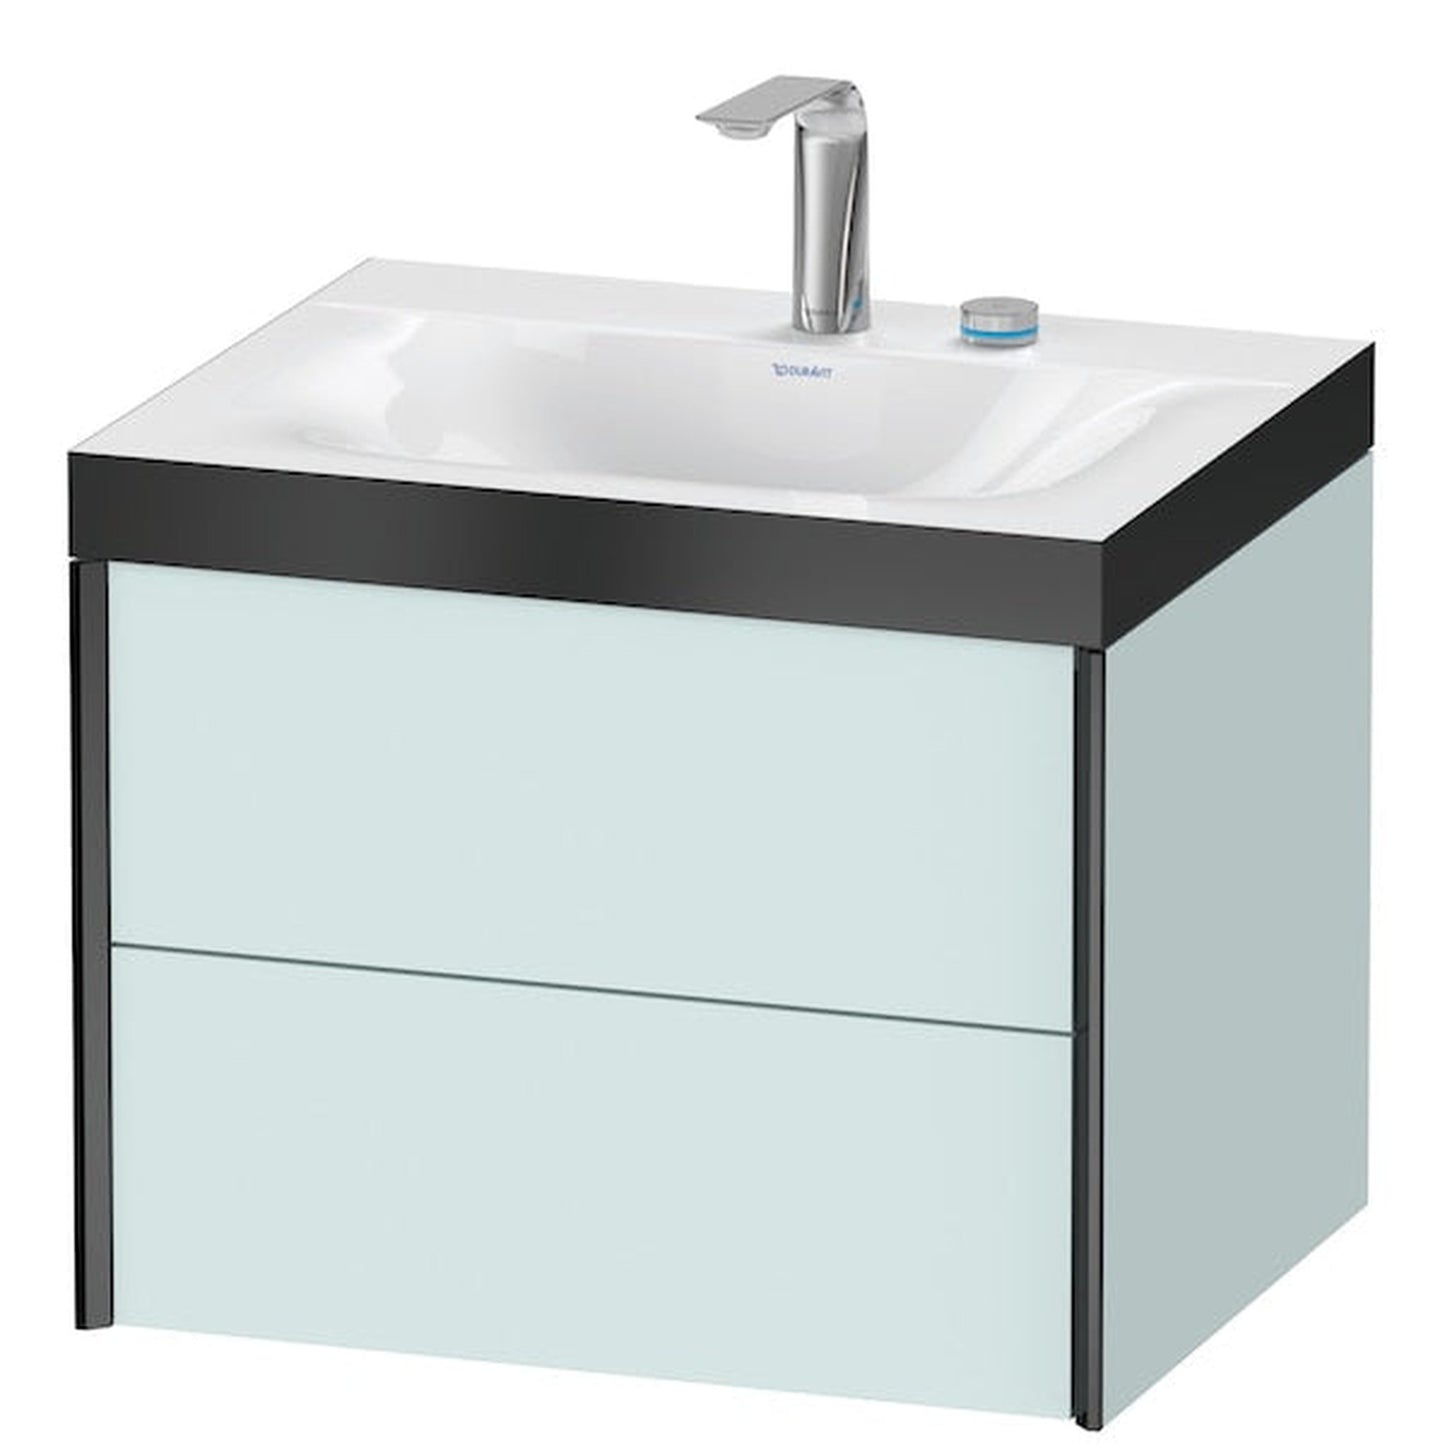 Duravit Xviu 24" x 20" x 19" Two Drawer C-Bonded Wall-Mount Vanity Kit With Two Tap Holes, Light Blue (XV4614EB209P)